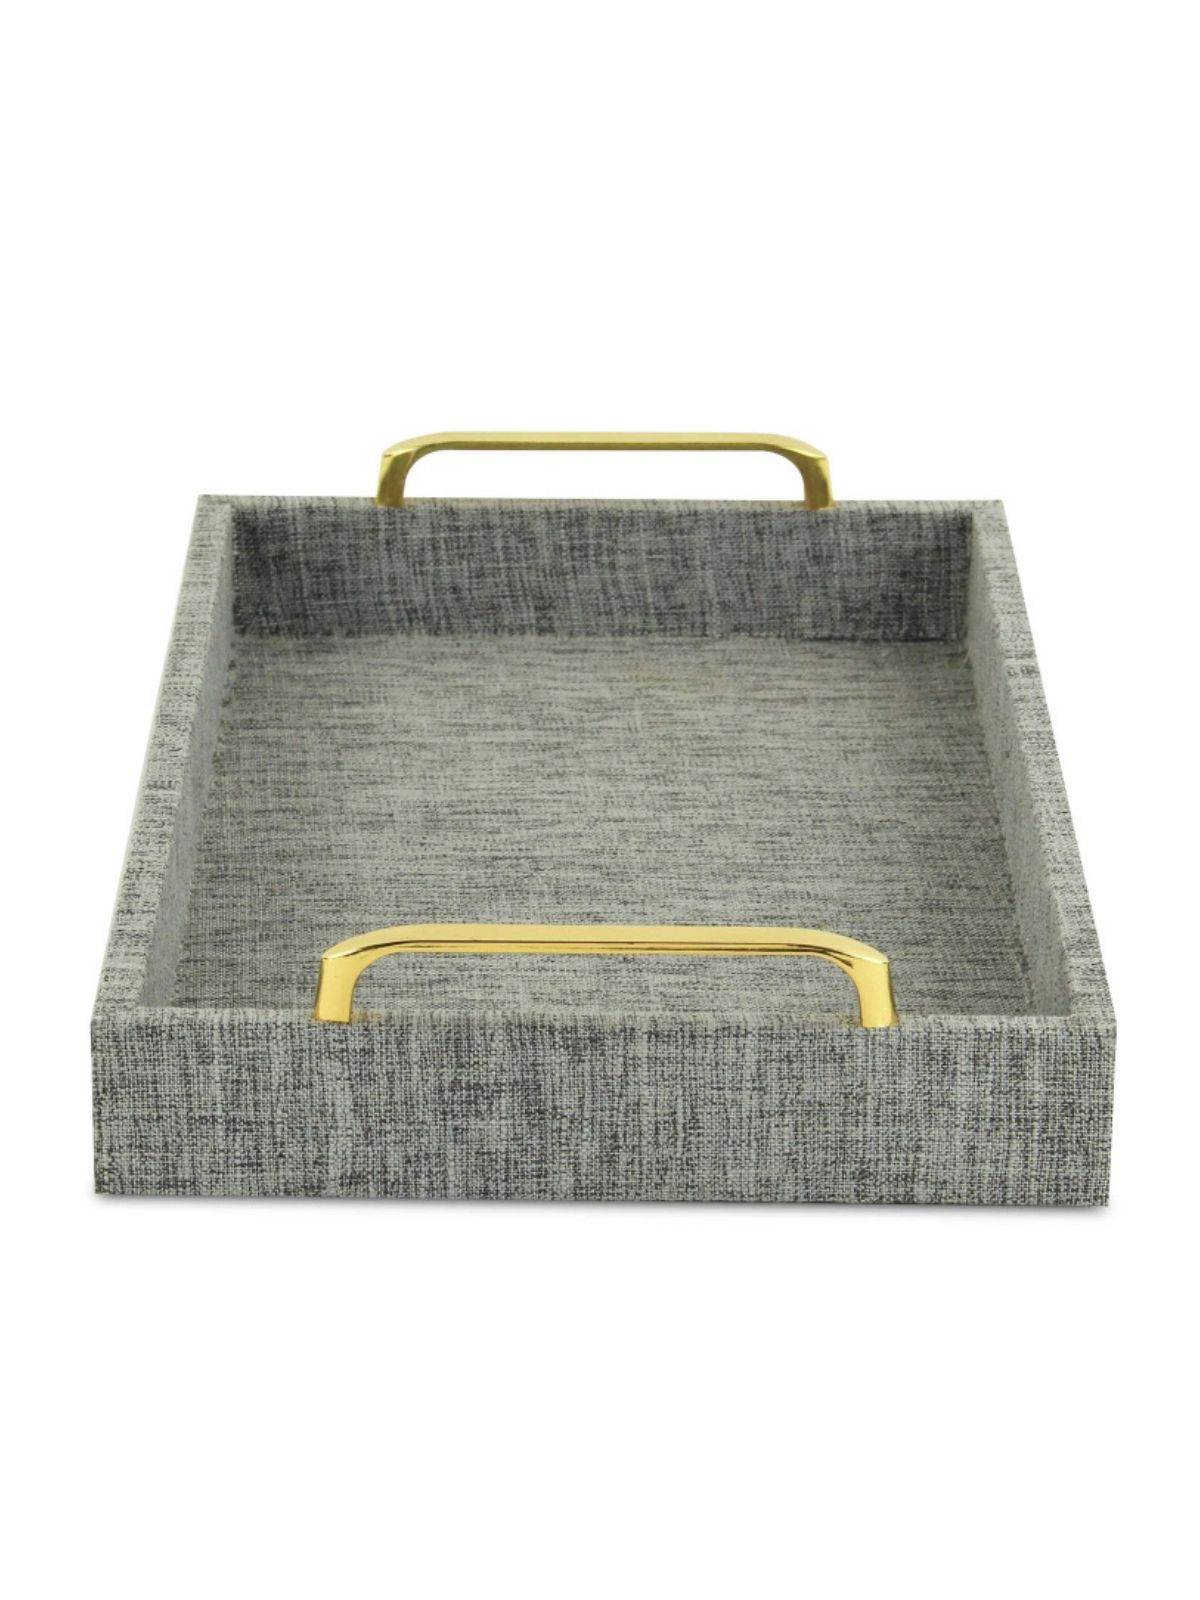 The Isola Di Canter Linen Tray in Gray is an entirely handmade and hand-crafted design that blends an engineered wood frame with a linen outer fabric and metal hardware. 